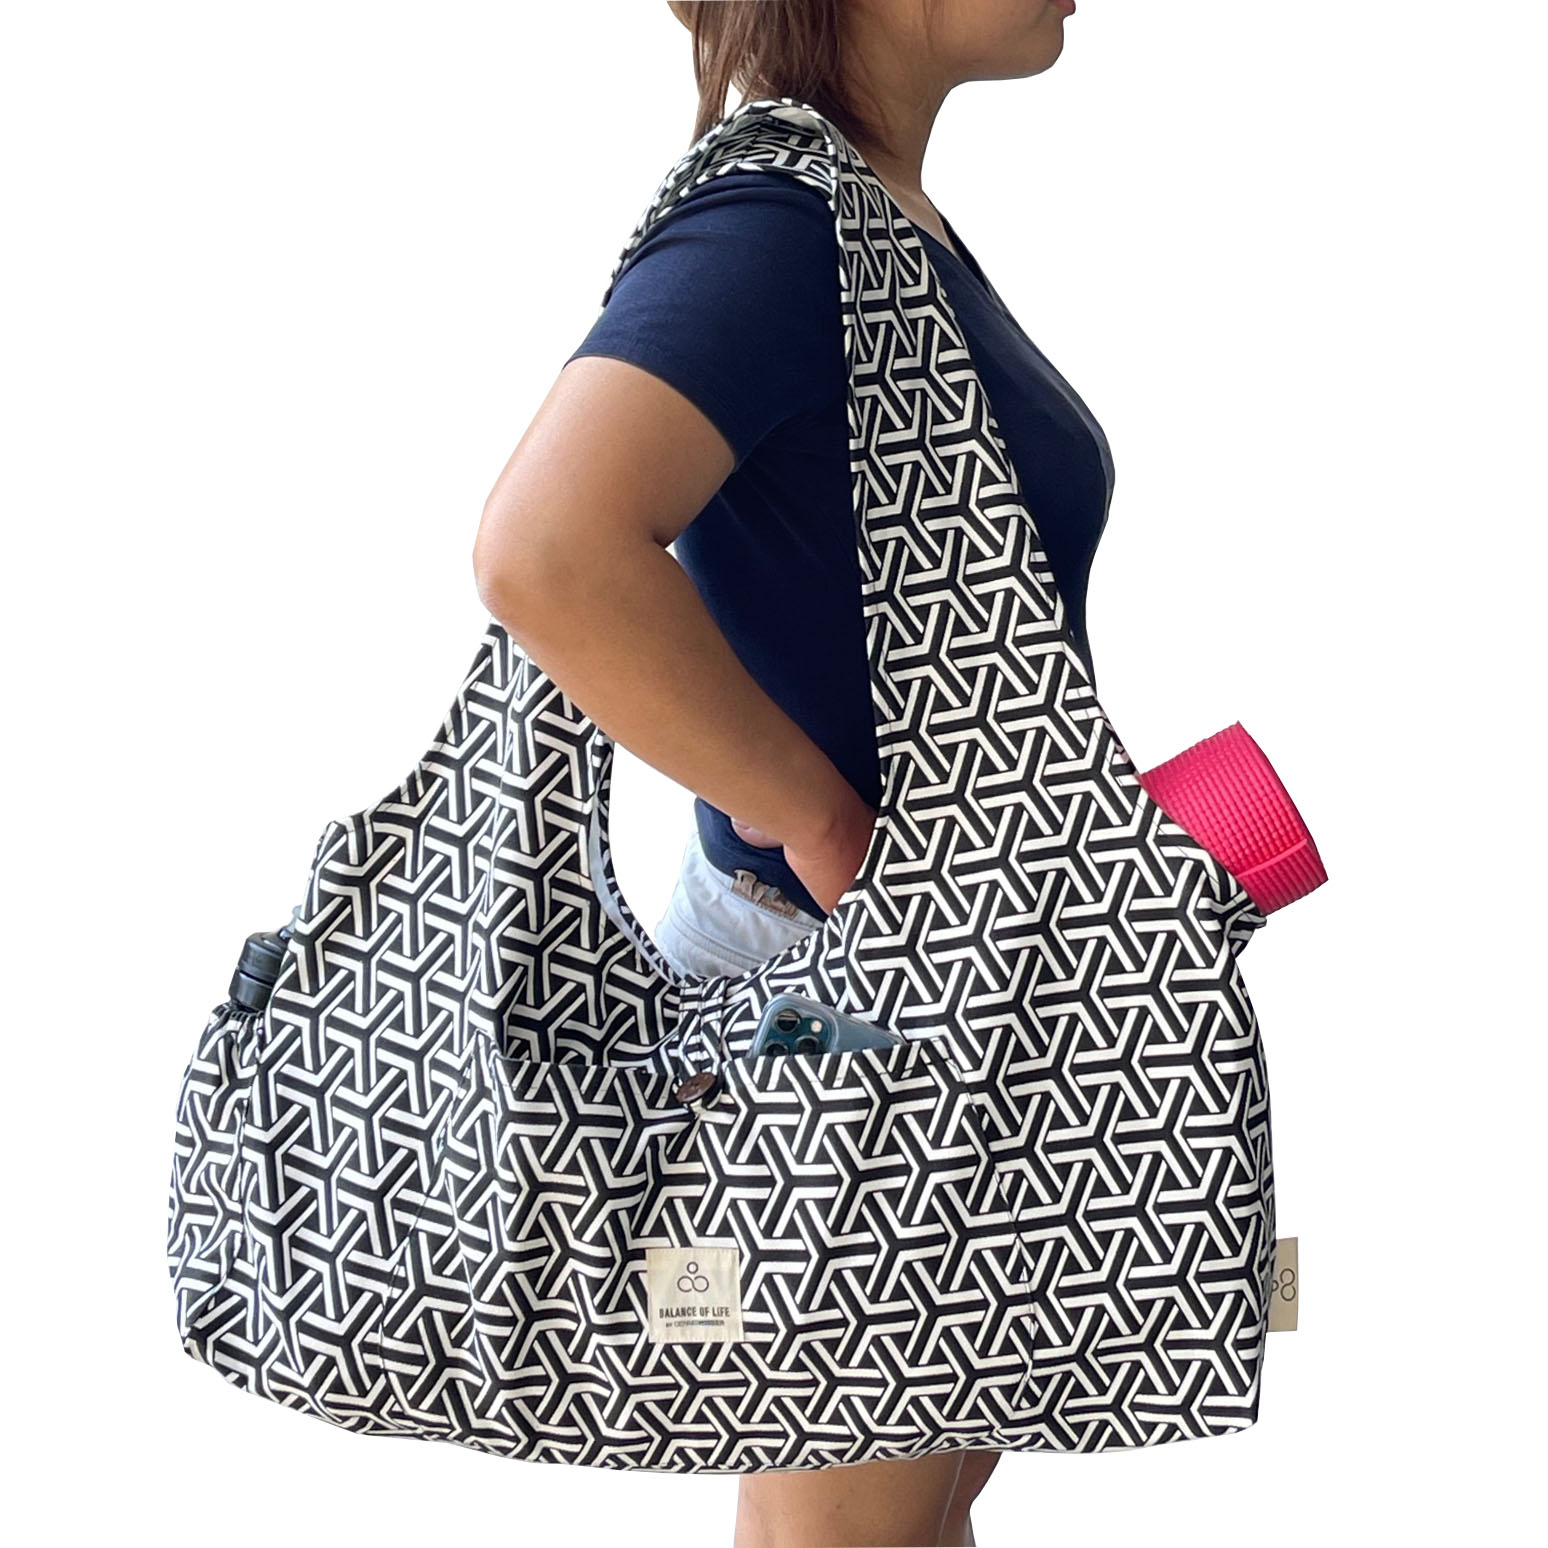 Best Yoga Tote Bag 2023: A Review and Buying Guide